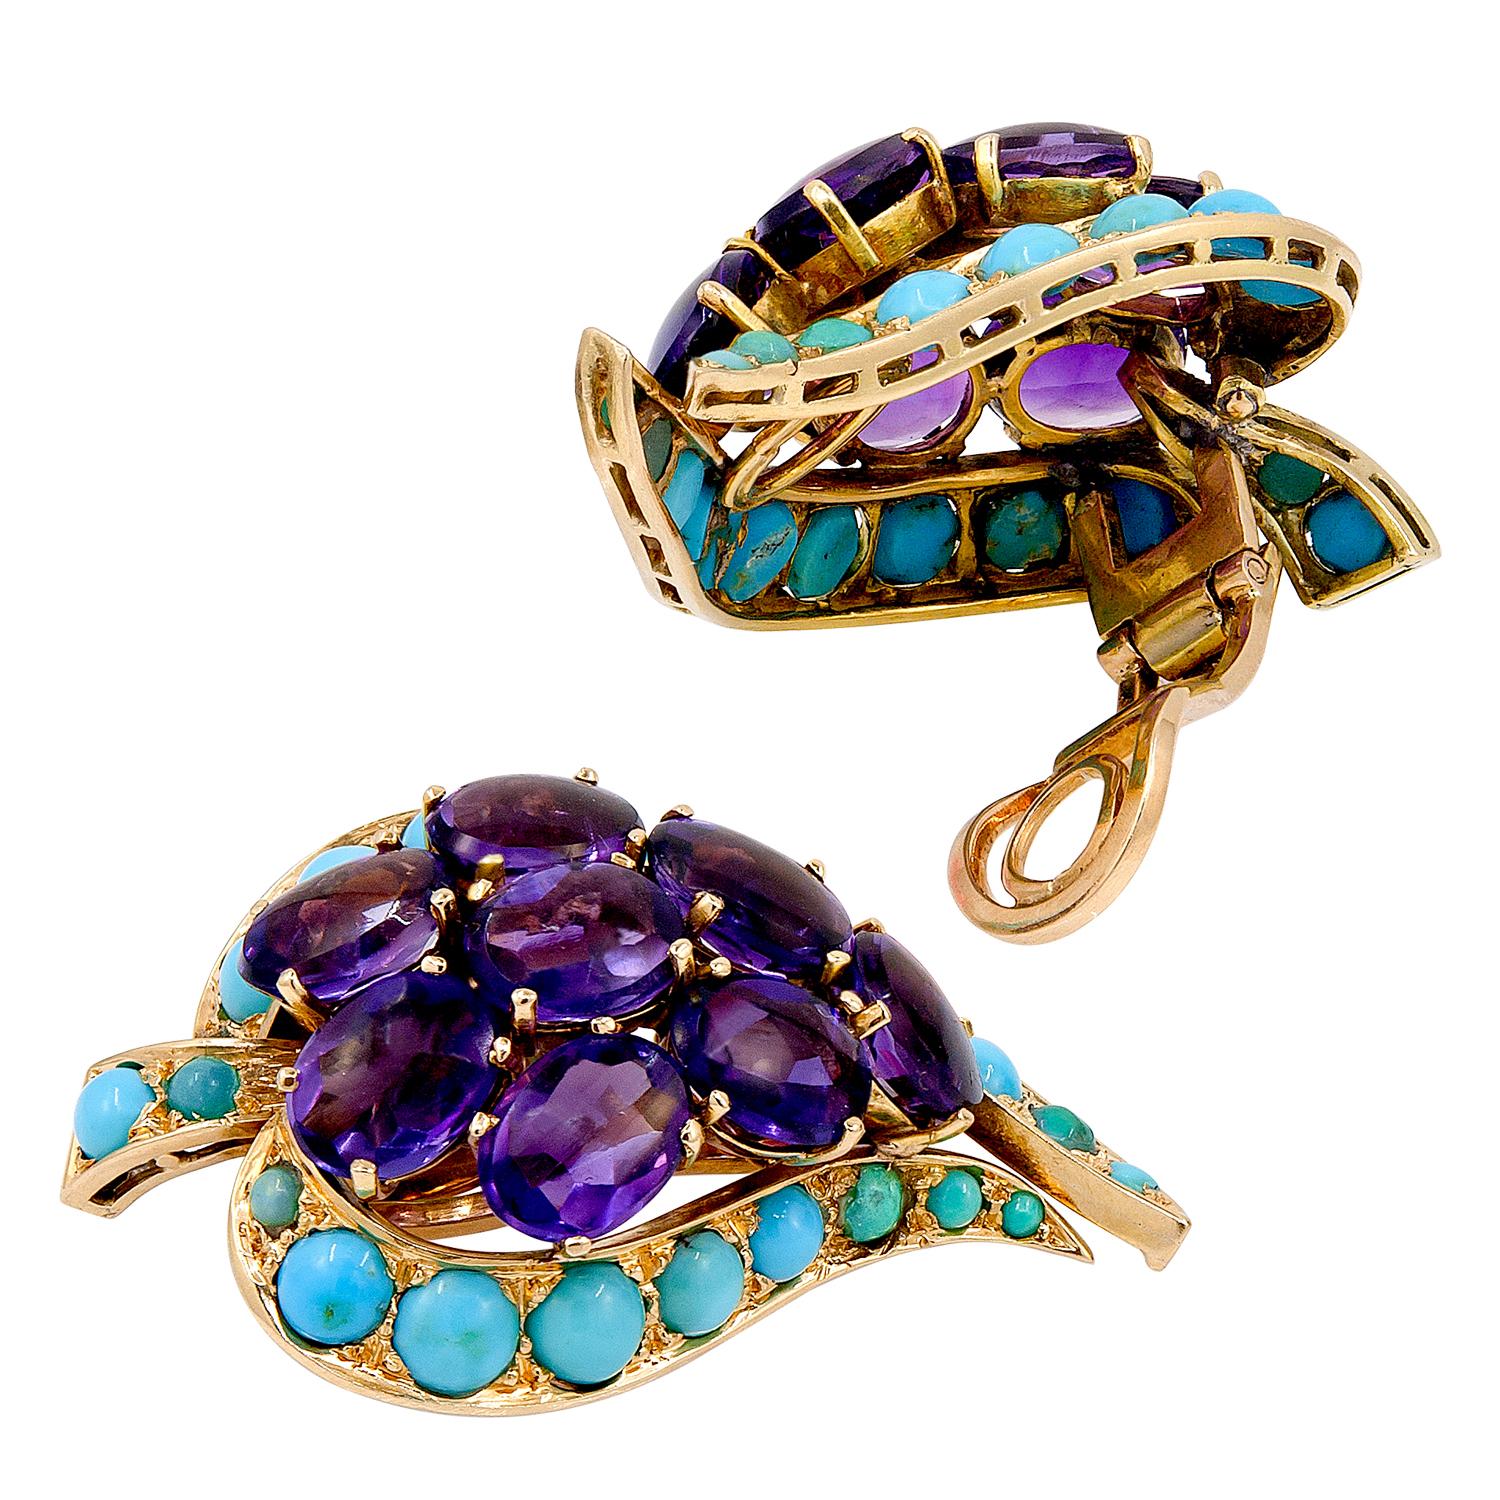 Cabochon Amethyst, Turquoise Paisley Brooch & Earrings
An 18k yellow gold paisley motif  brooch and ear clips, set with cabochon amethyst and turquoise, circa 1970s
brooch measures approx. 2.25″ in length by 1.25″ in width
earrings measure approx.